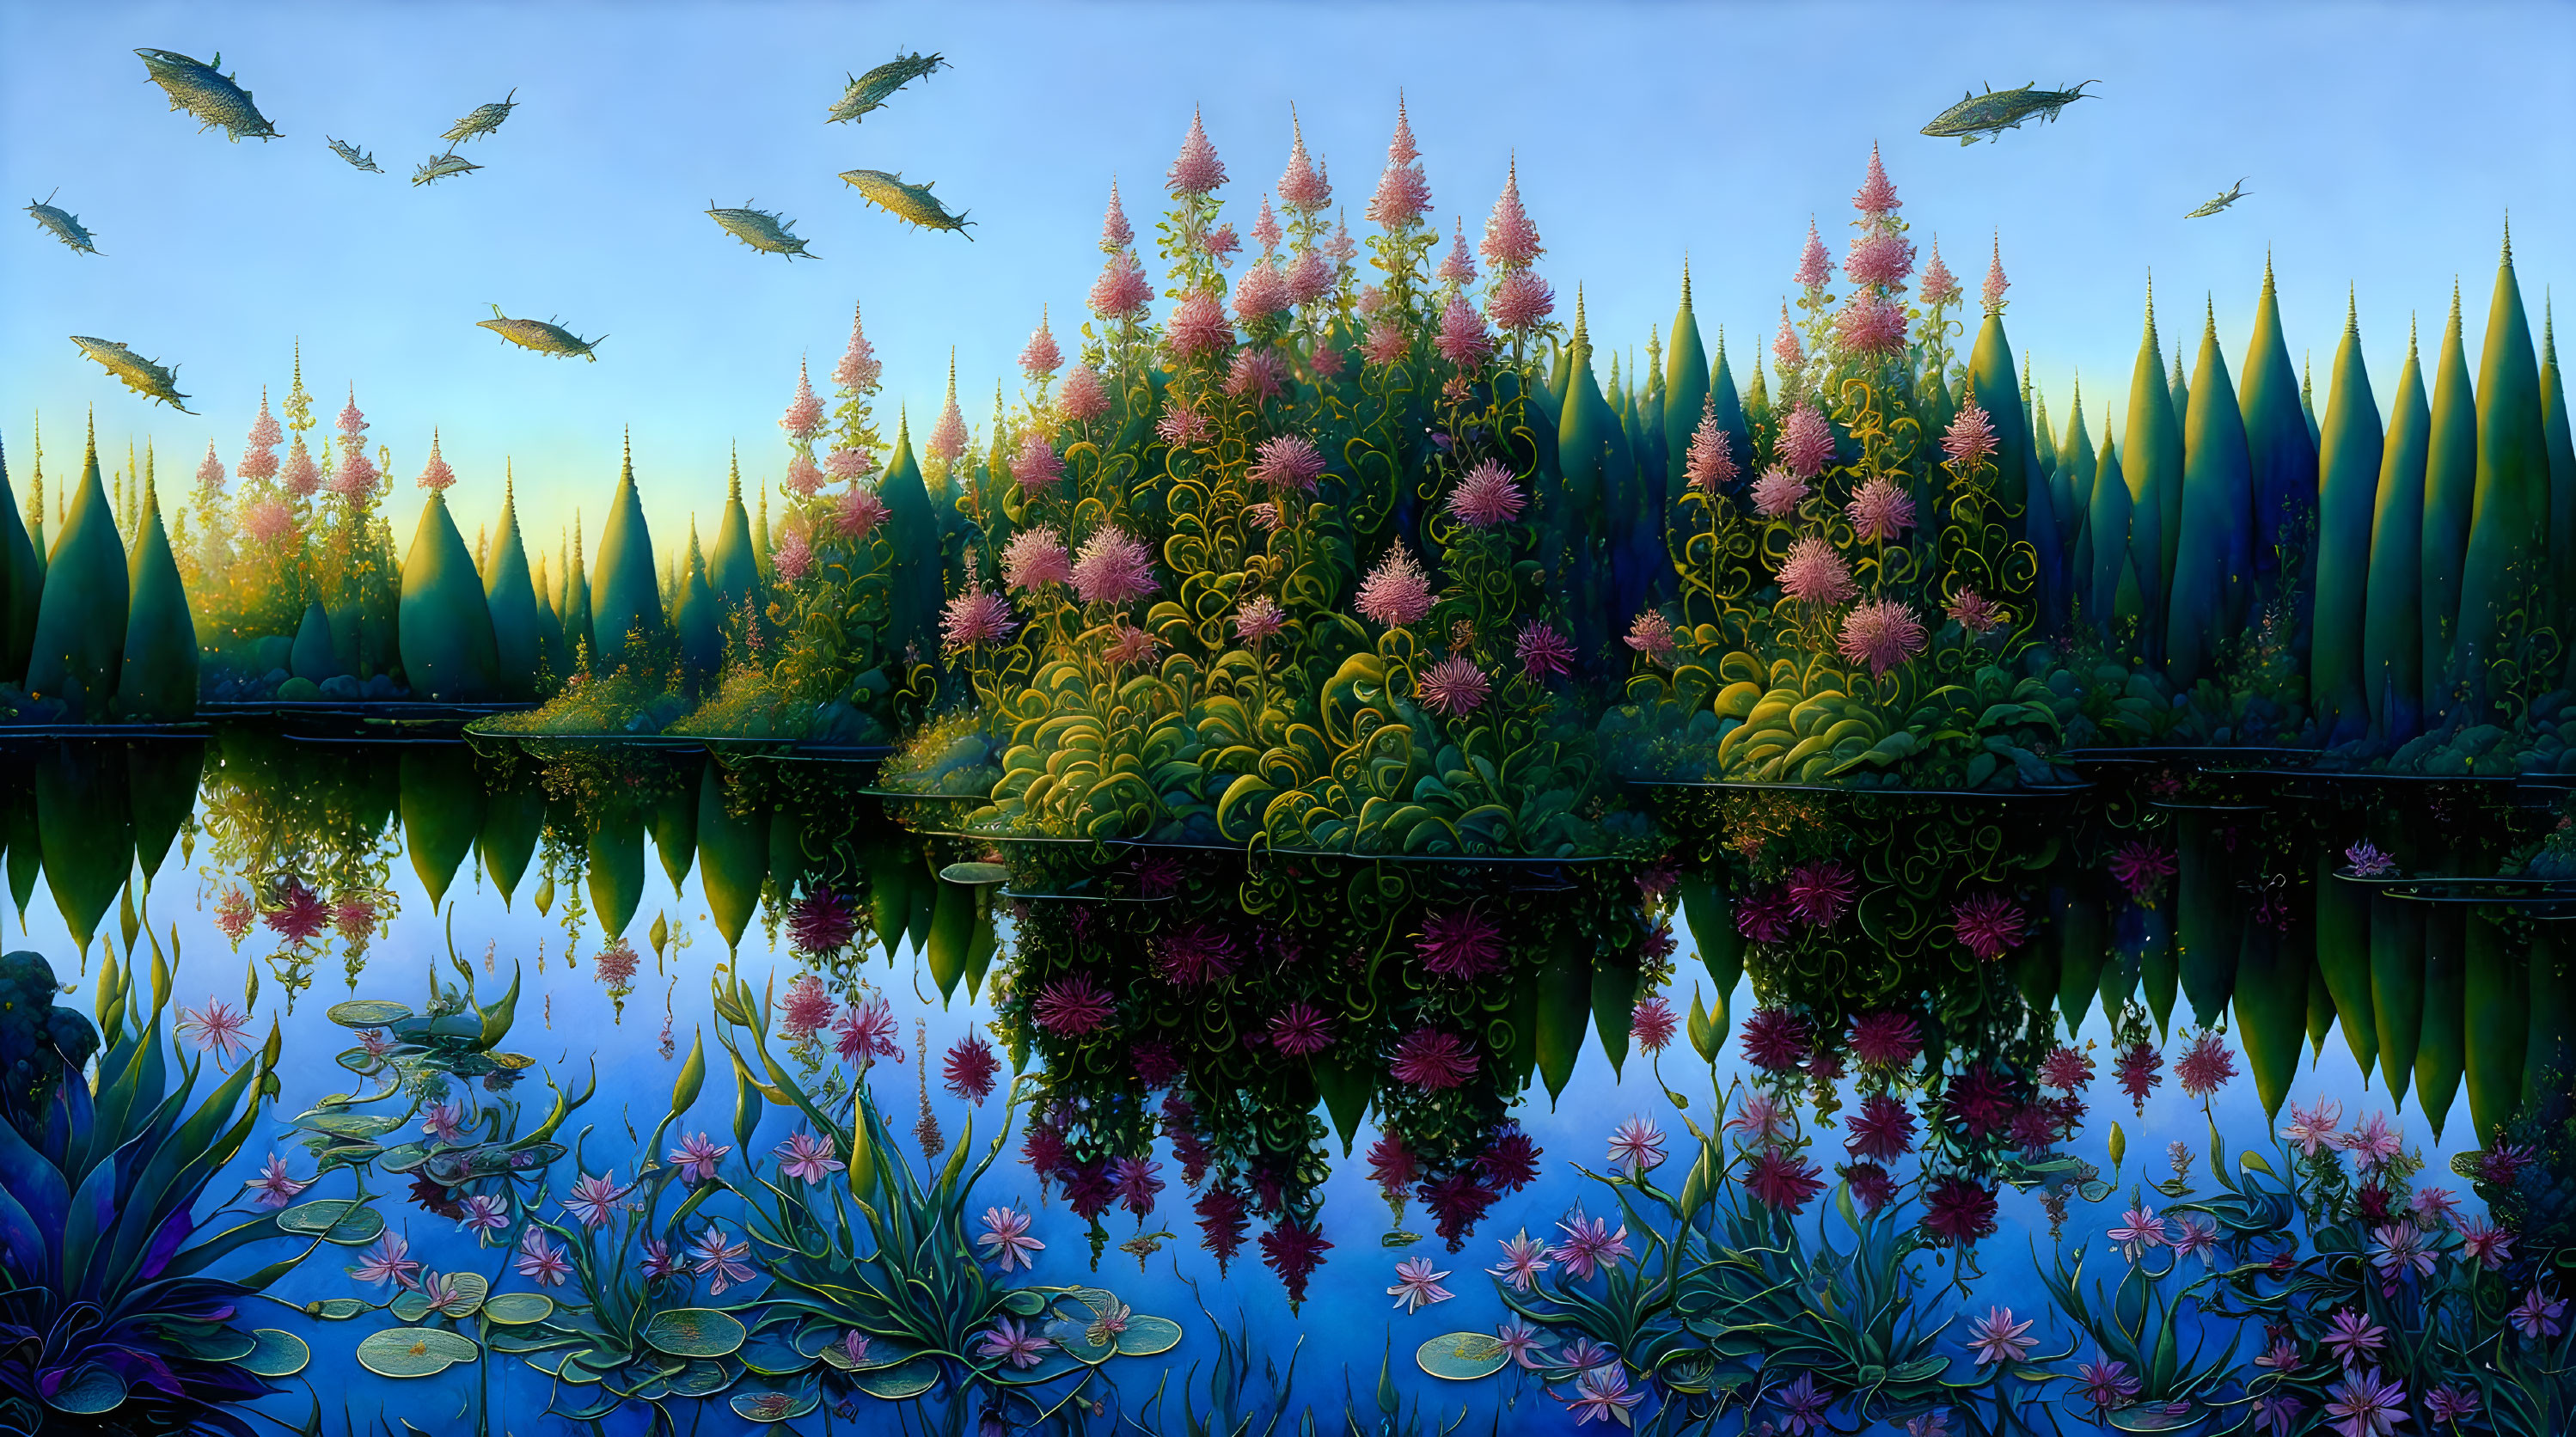 Fantastical landscape with flying fish, colorful flora, and twilight sky.